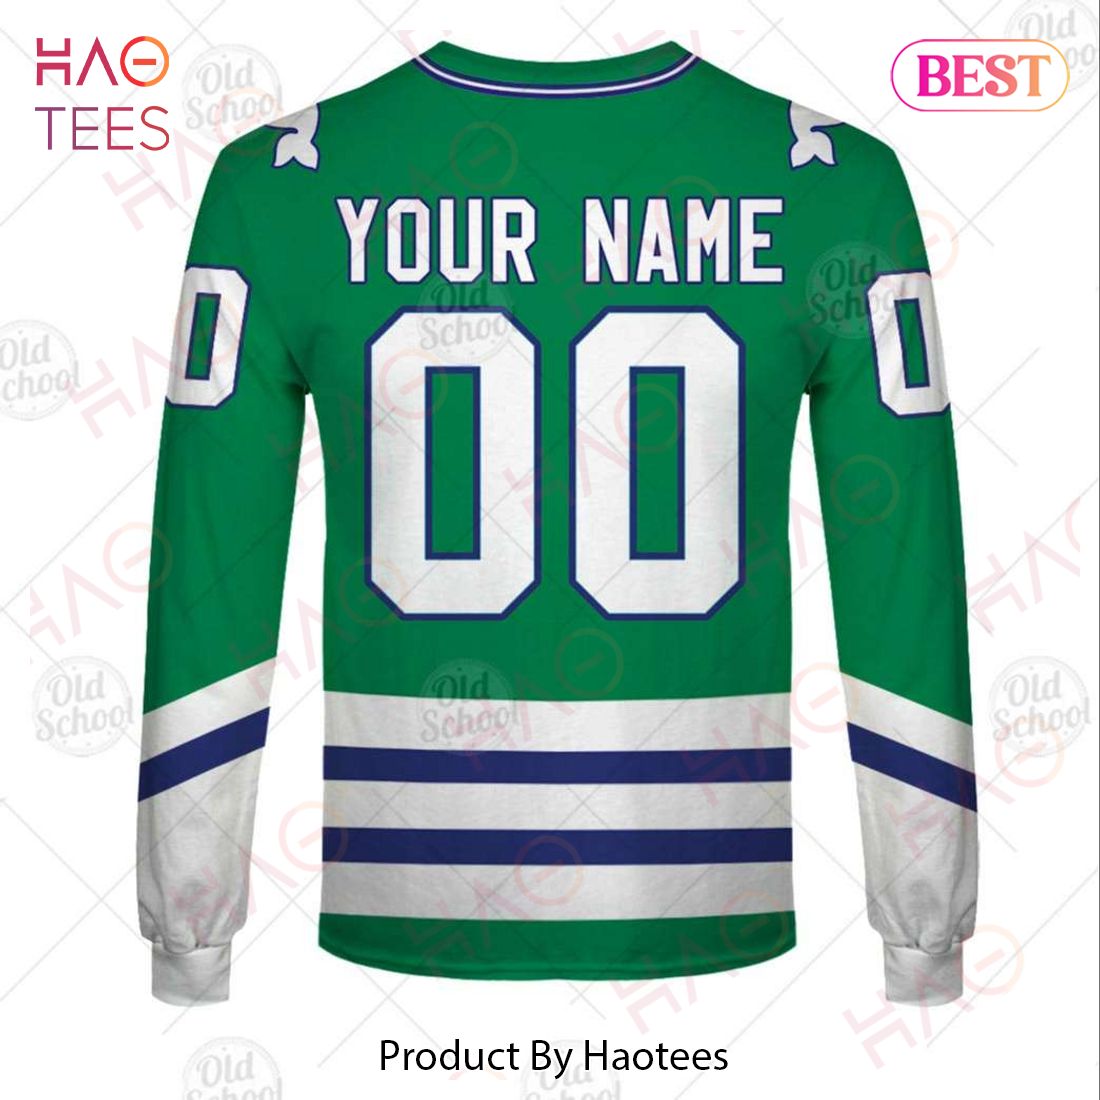 Hartford Whalers Signed Jerseys, Collectible Whalers Jerseys